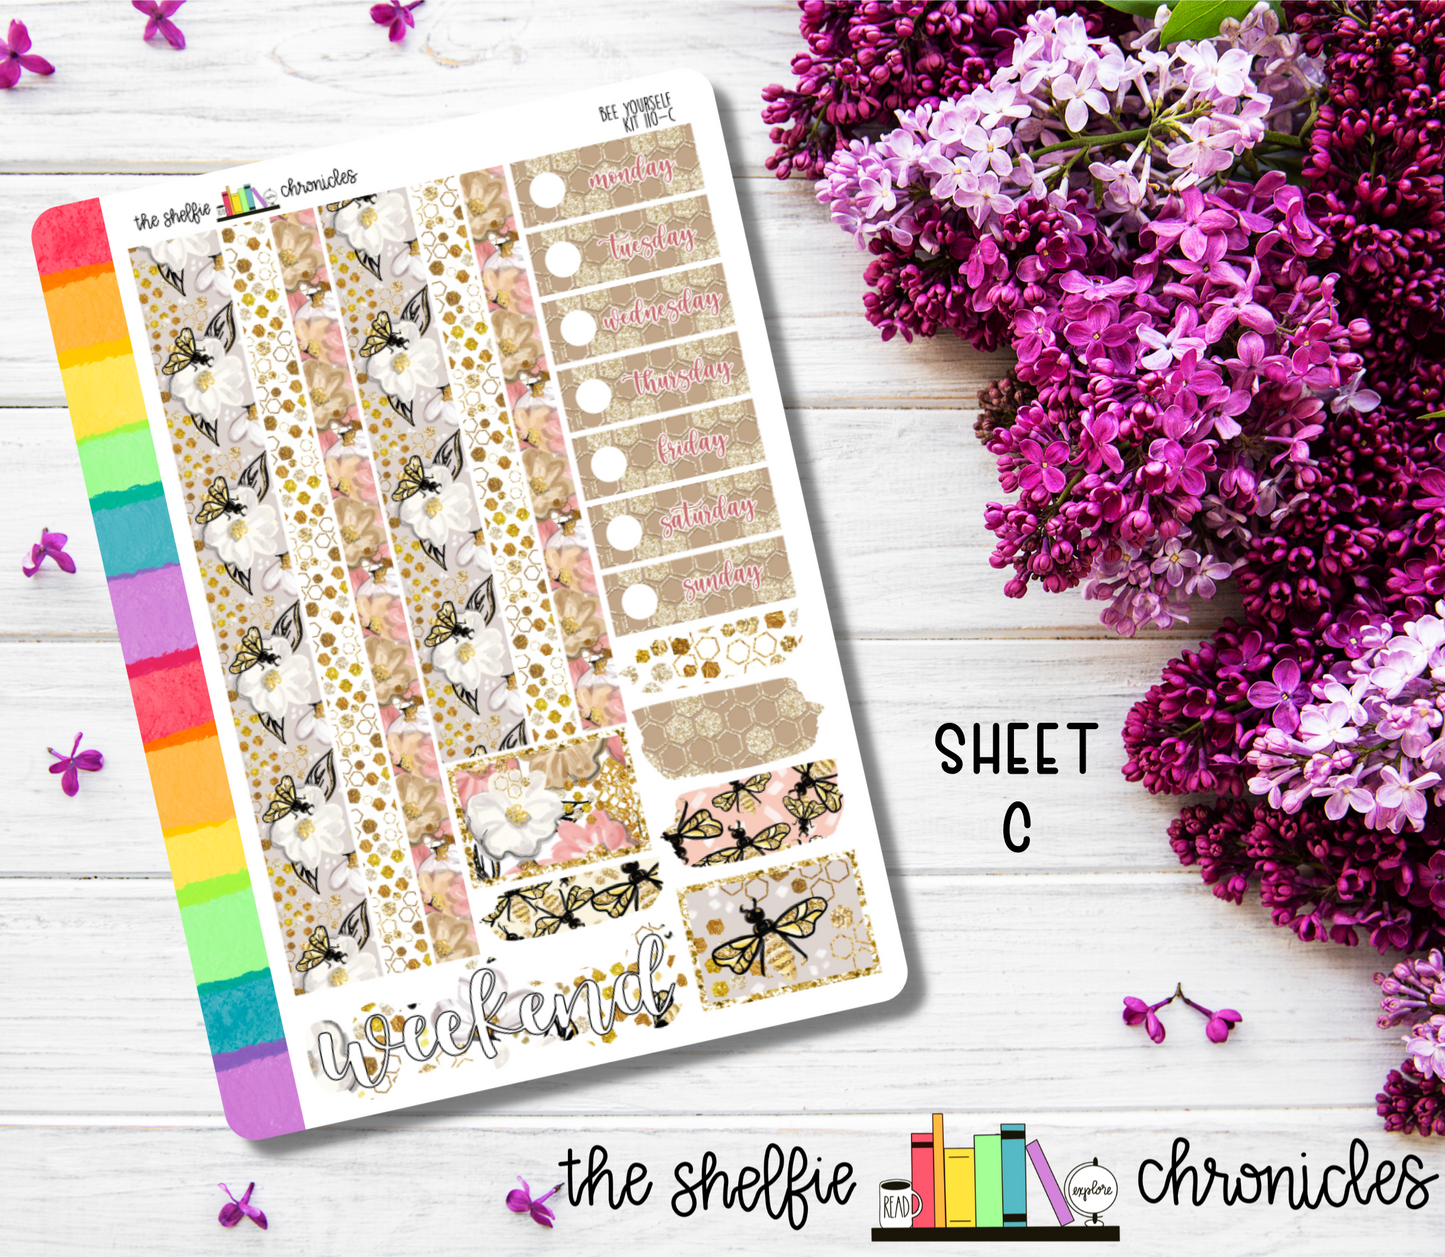 Kit 110 - Bee Yourself Weekly Kit - Die Cut Stickers - Repositionable Paper